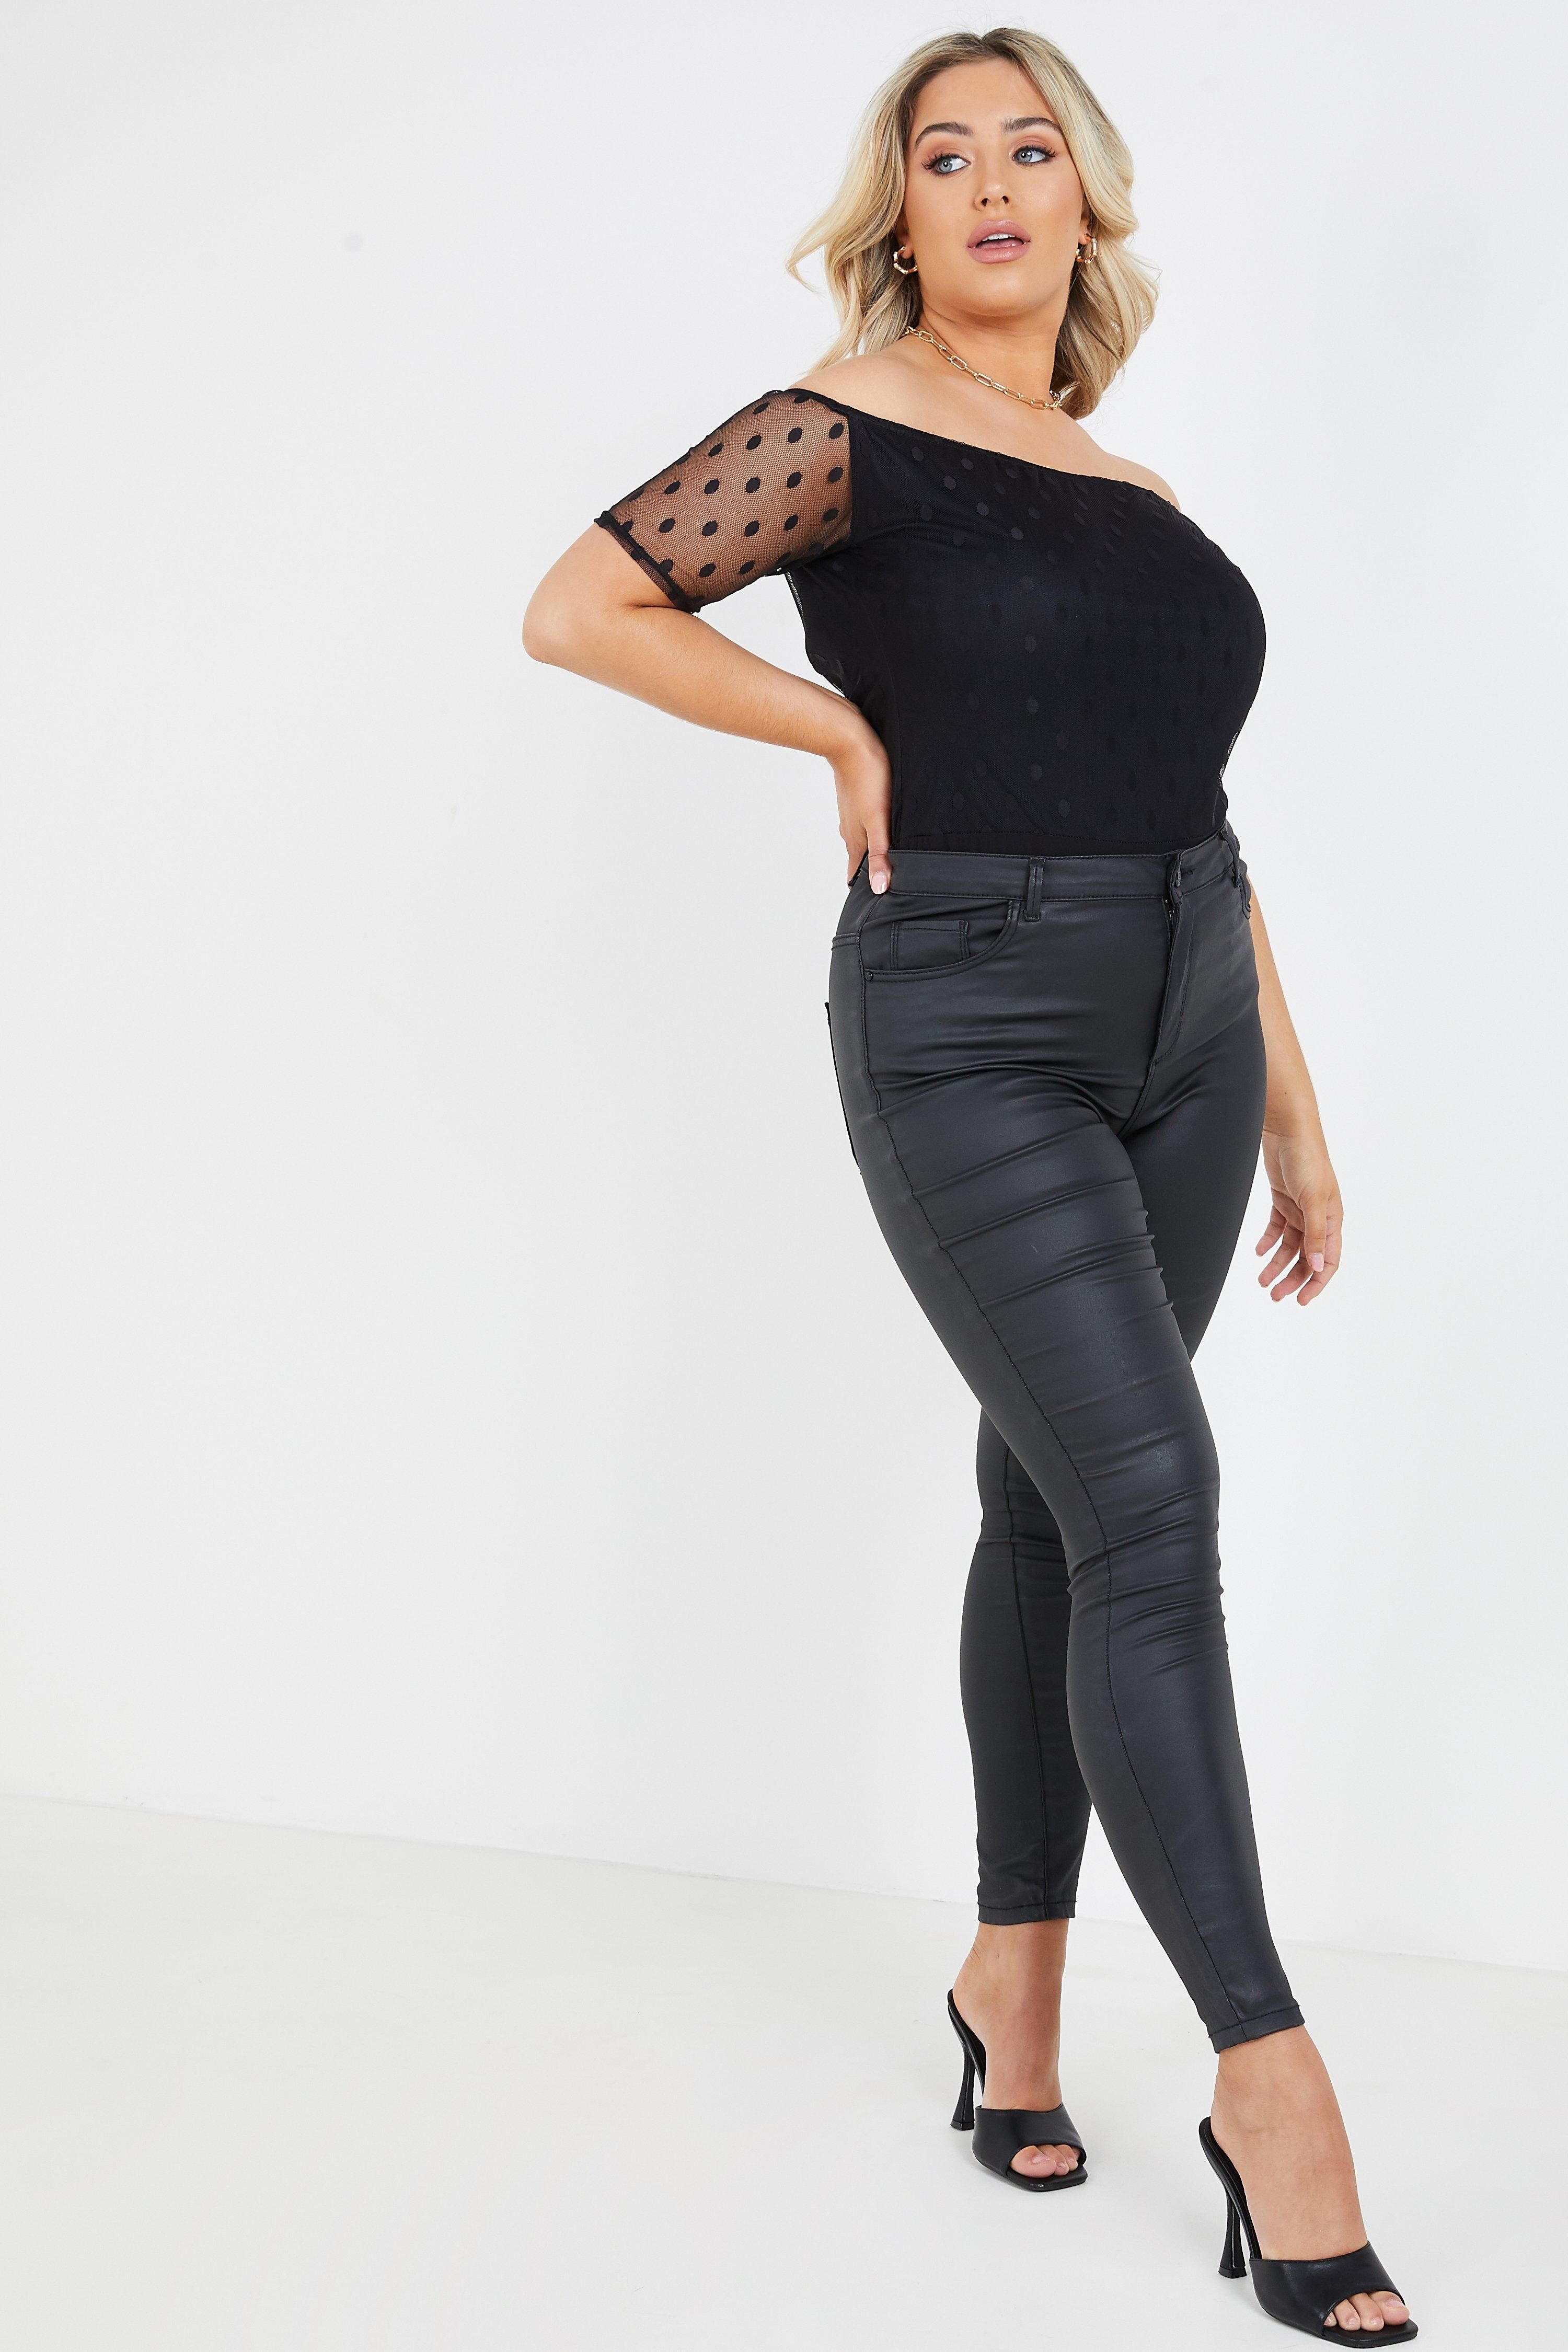 - Curve collection  - Polka dot   - Bardot style   - Mesh style   - Bodysuit  - Length: 70cm approx  - Model Height: 5' 10